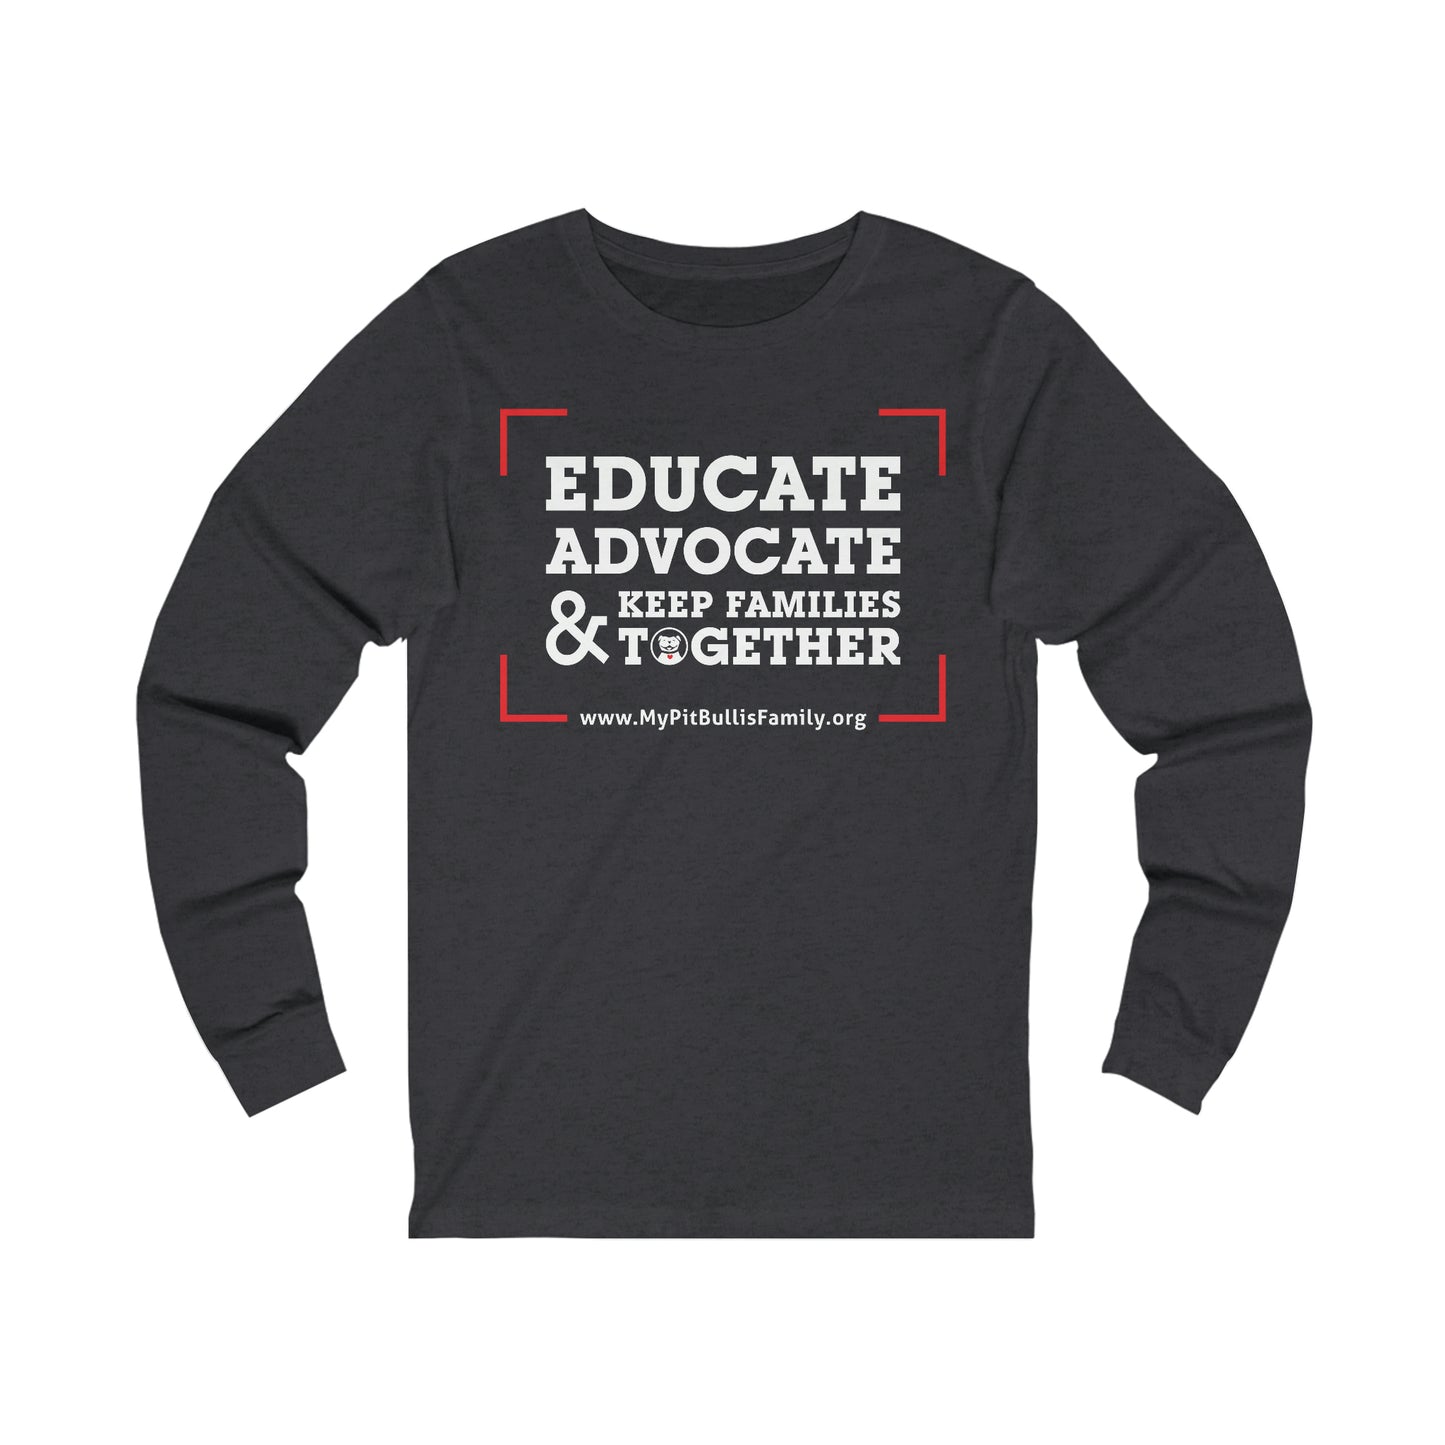 Keep Families Together Unisex Jersey Long Sleeve Tee